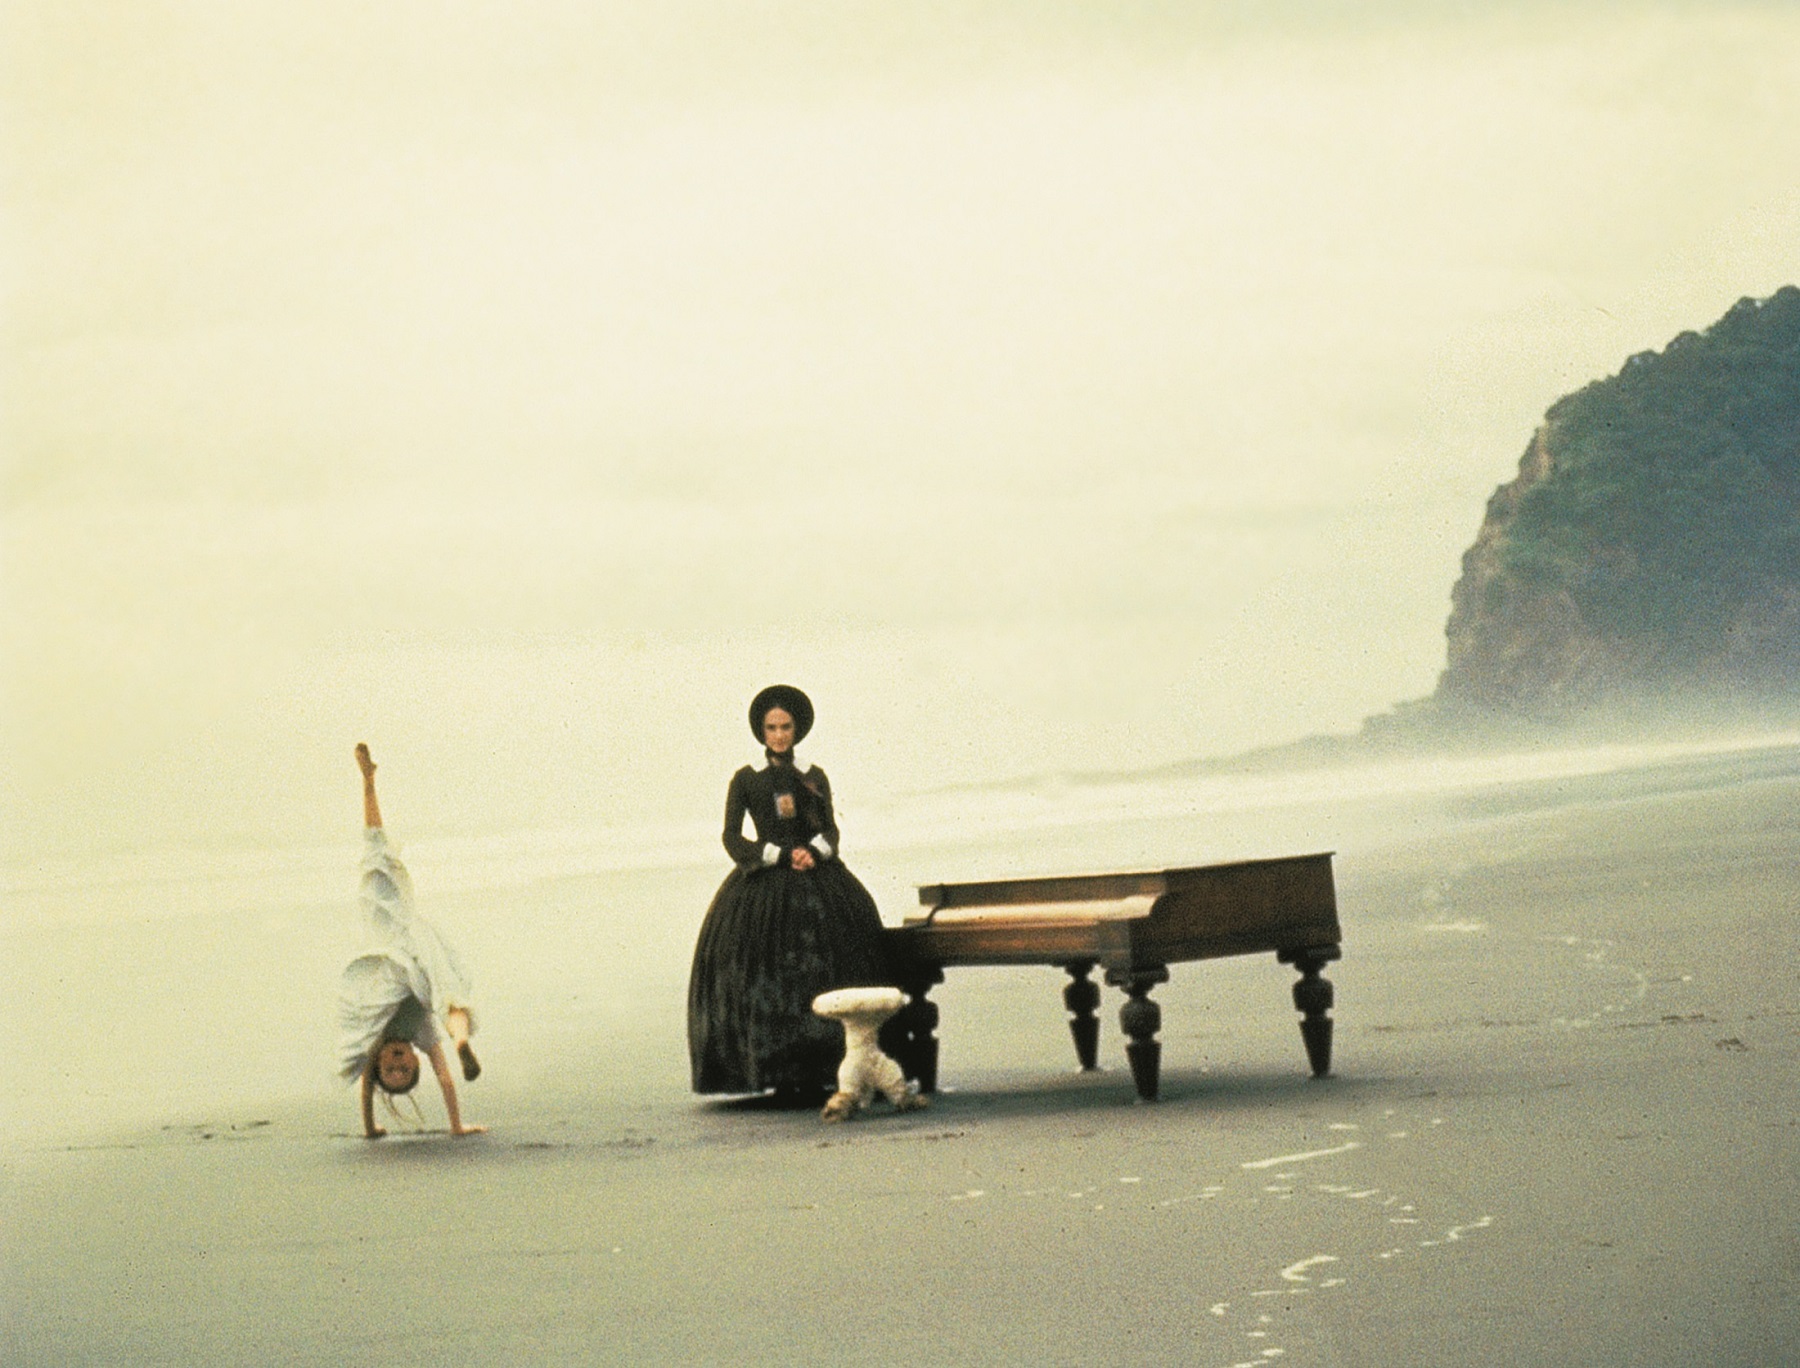 Still from The Piano. Image courtesy of Park Circus Studio Canal.